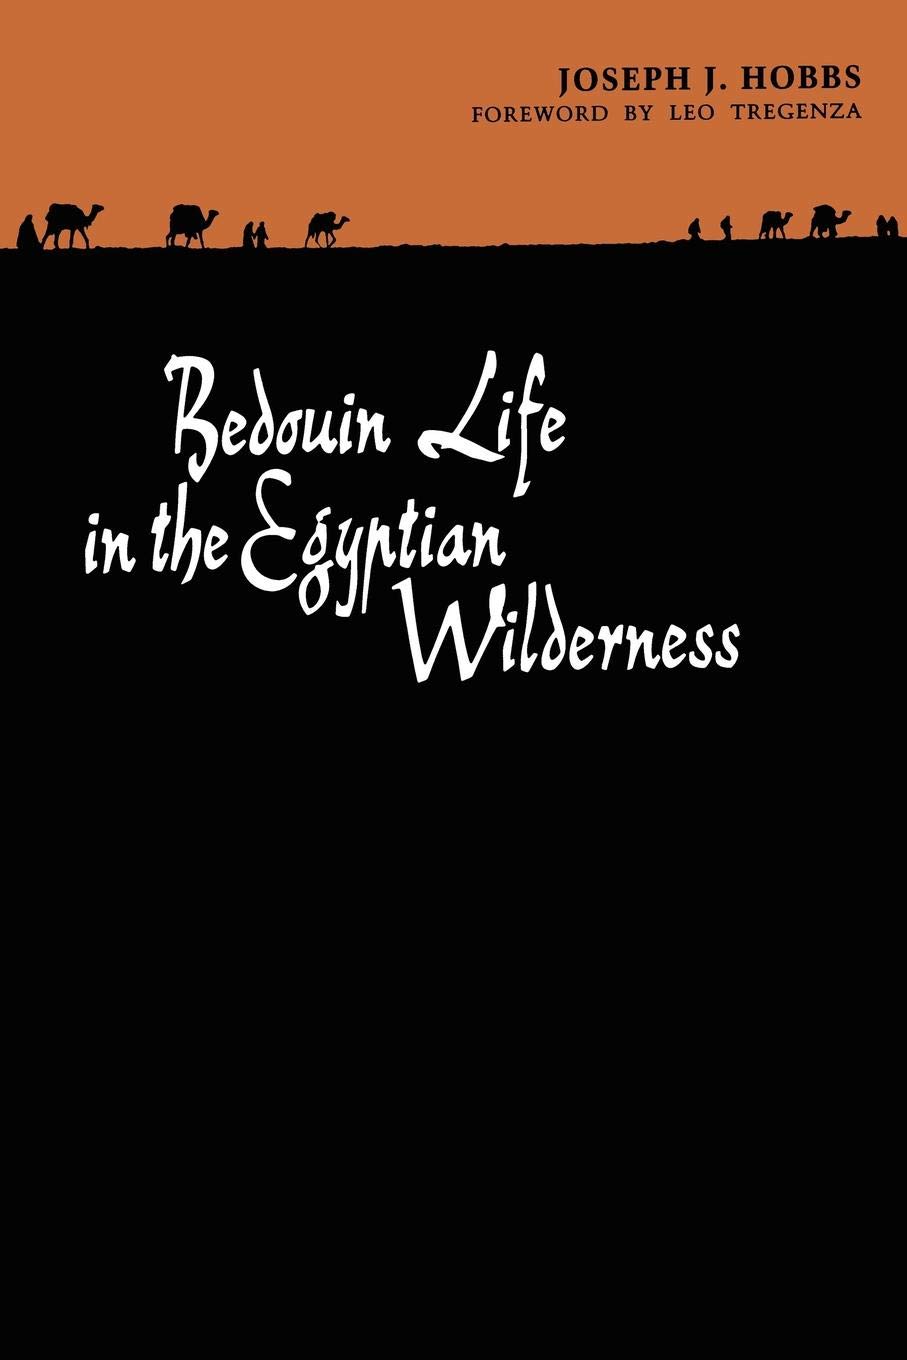 Bedouin life in the Egyptian wilderness